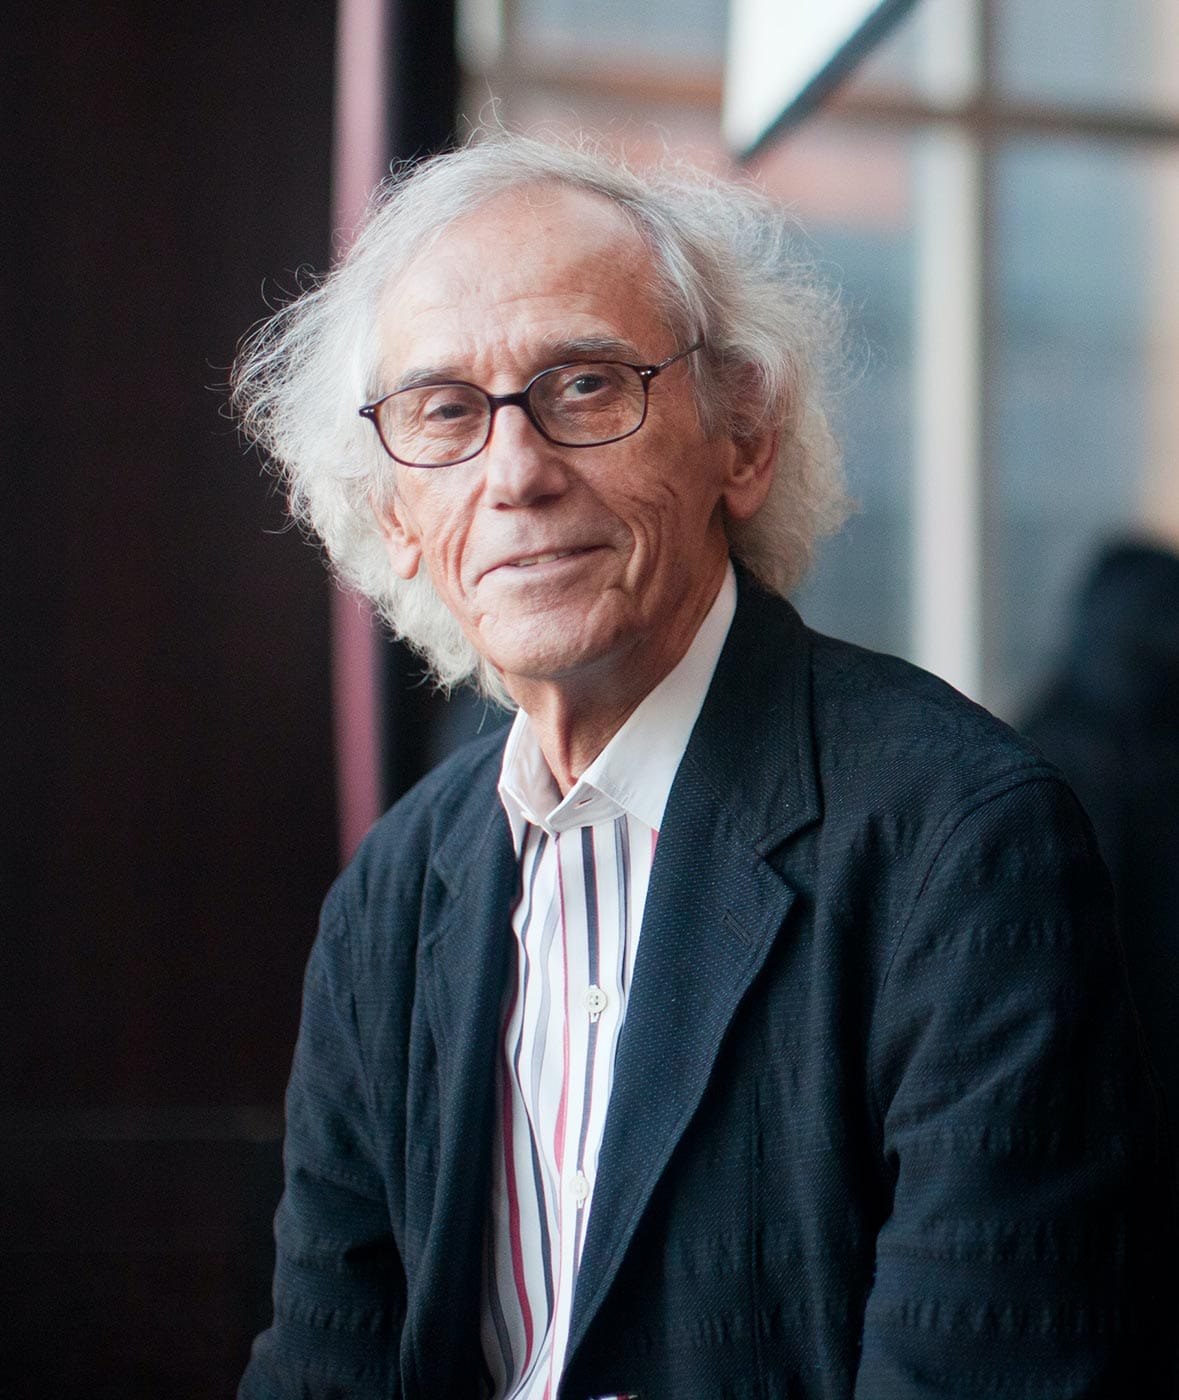 Christo standing in front of a wall of windows at the Mandarin Oriental in New York City.